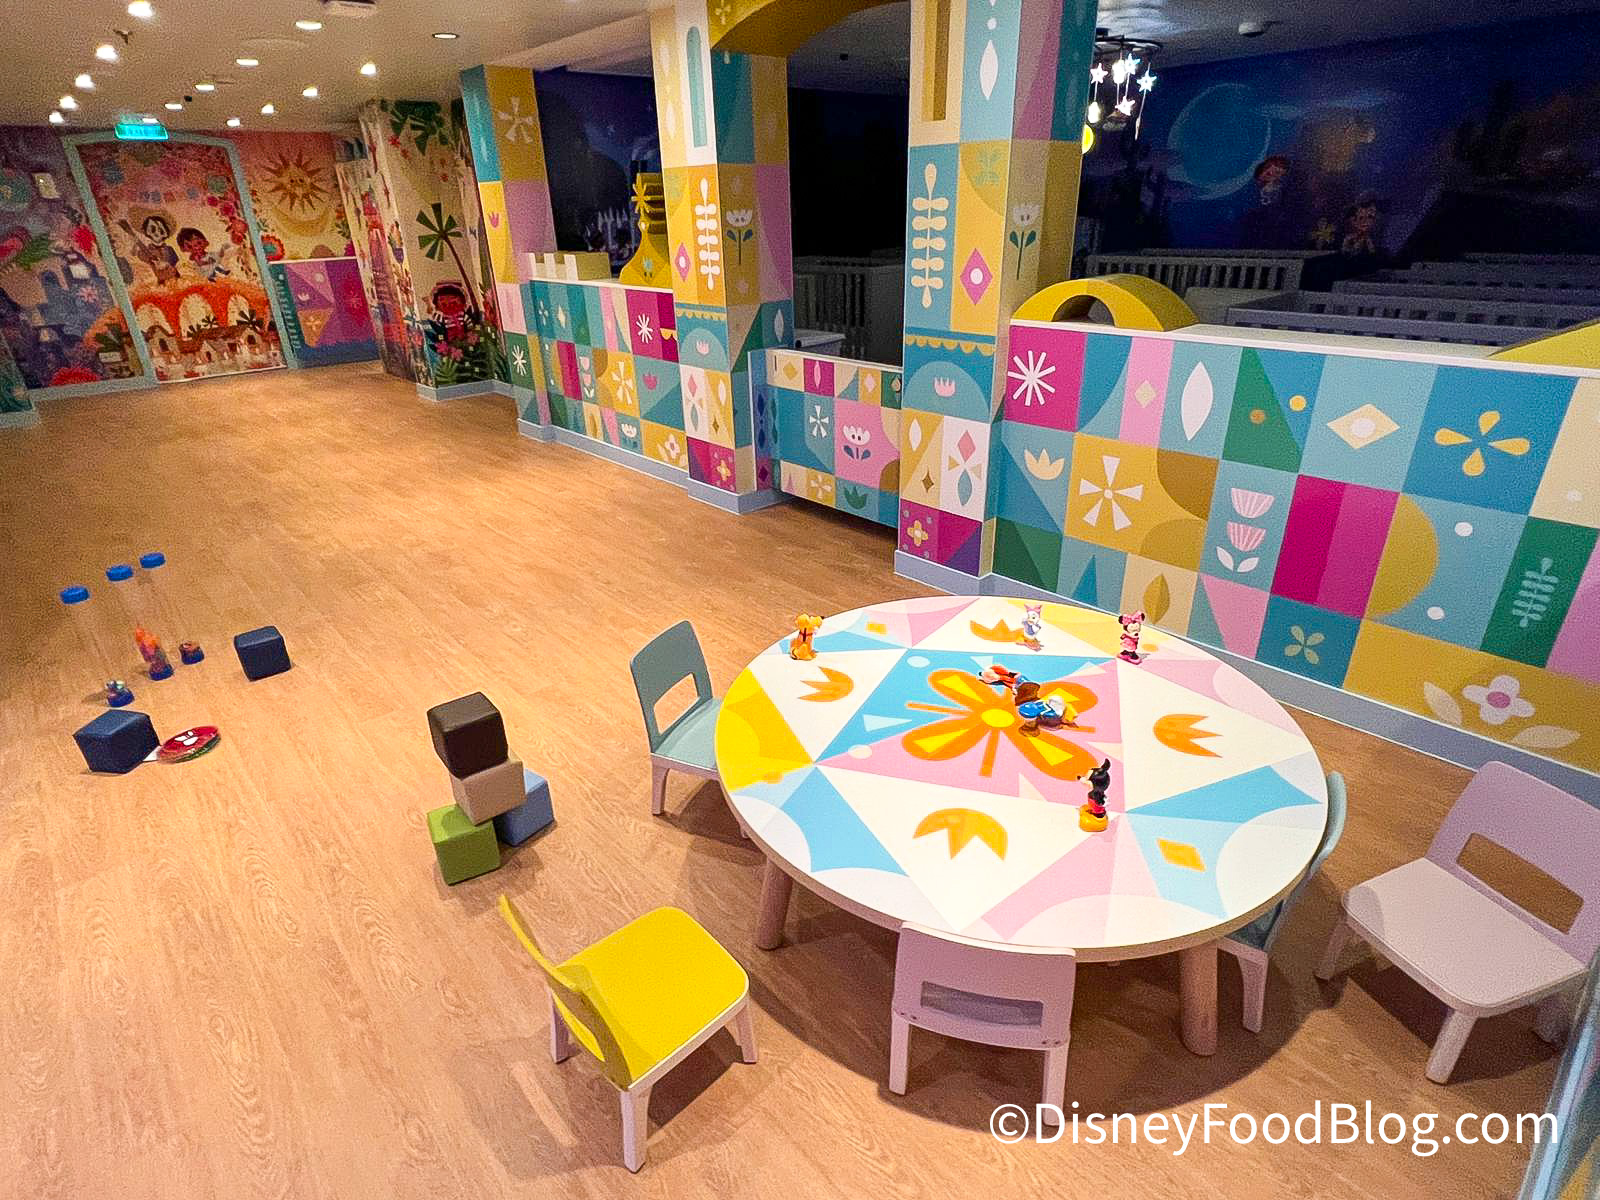 https://www.disneyfoodblog.com/wp-content/uploads/2022/06/2022-dcl-wish-its-a-small-world-nursery-play-space-media-cruise.jpg